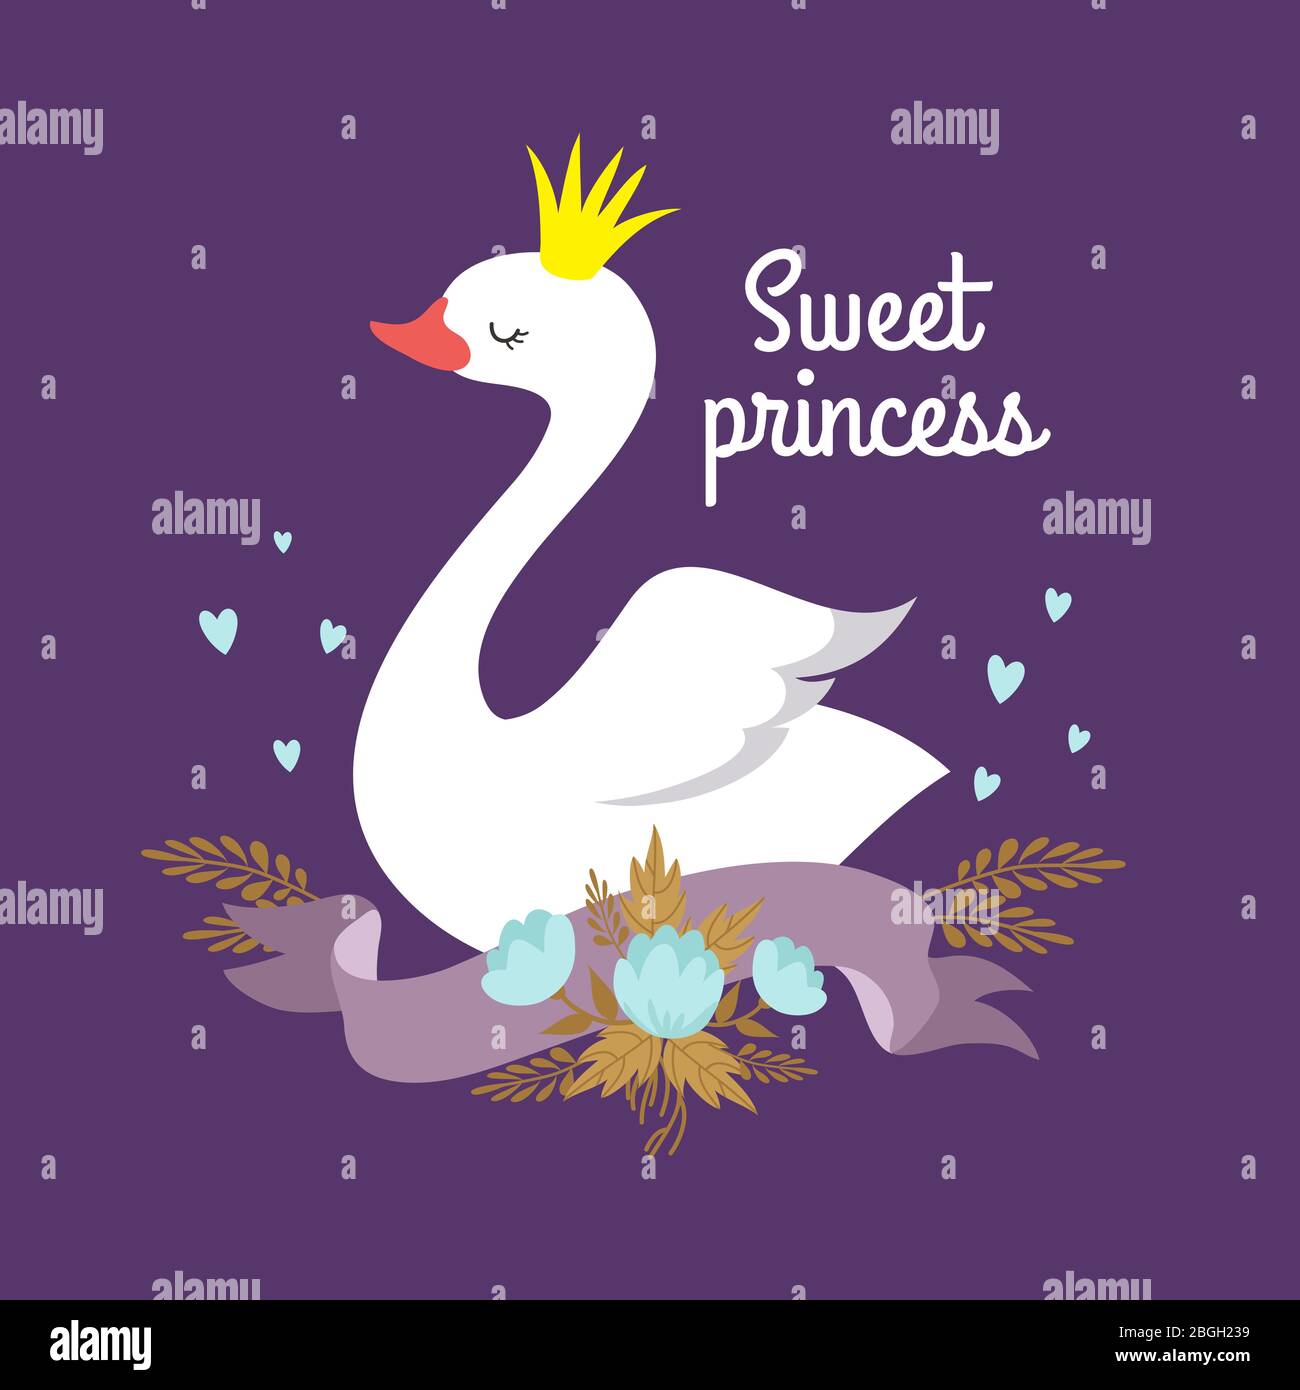 Cute cartoon white baby swan princess vector graphics for poster or girl t-shirt. Illustration of bird, sweet princess card or poster Stock Vector